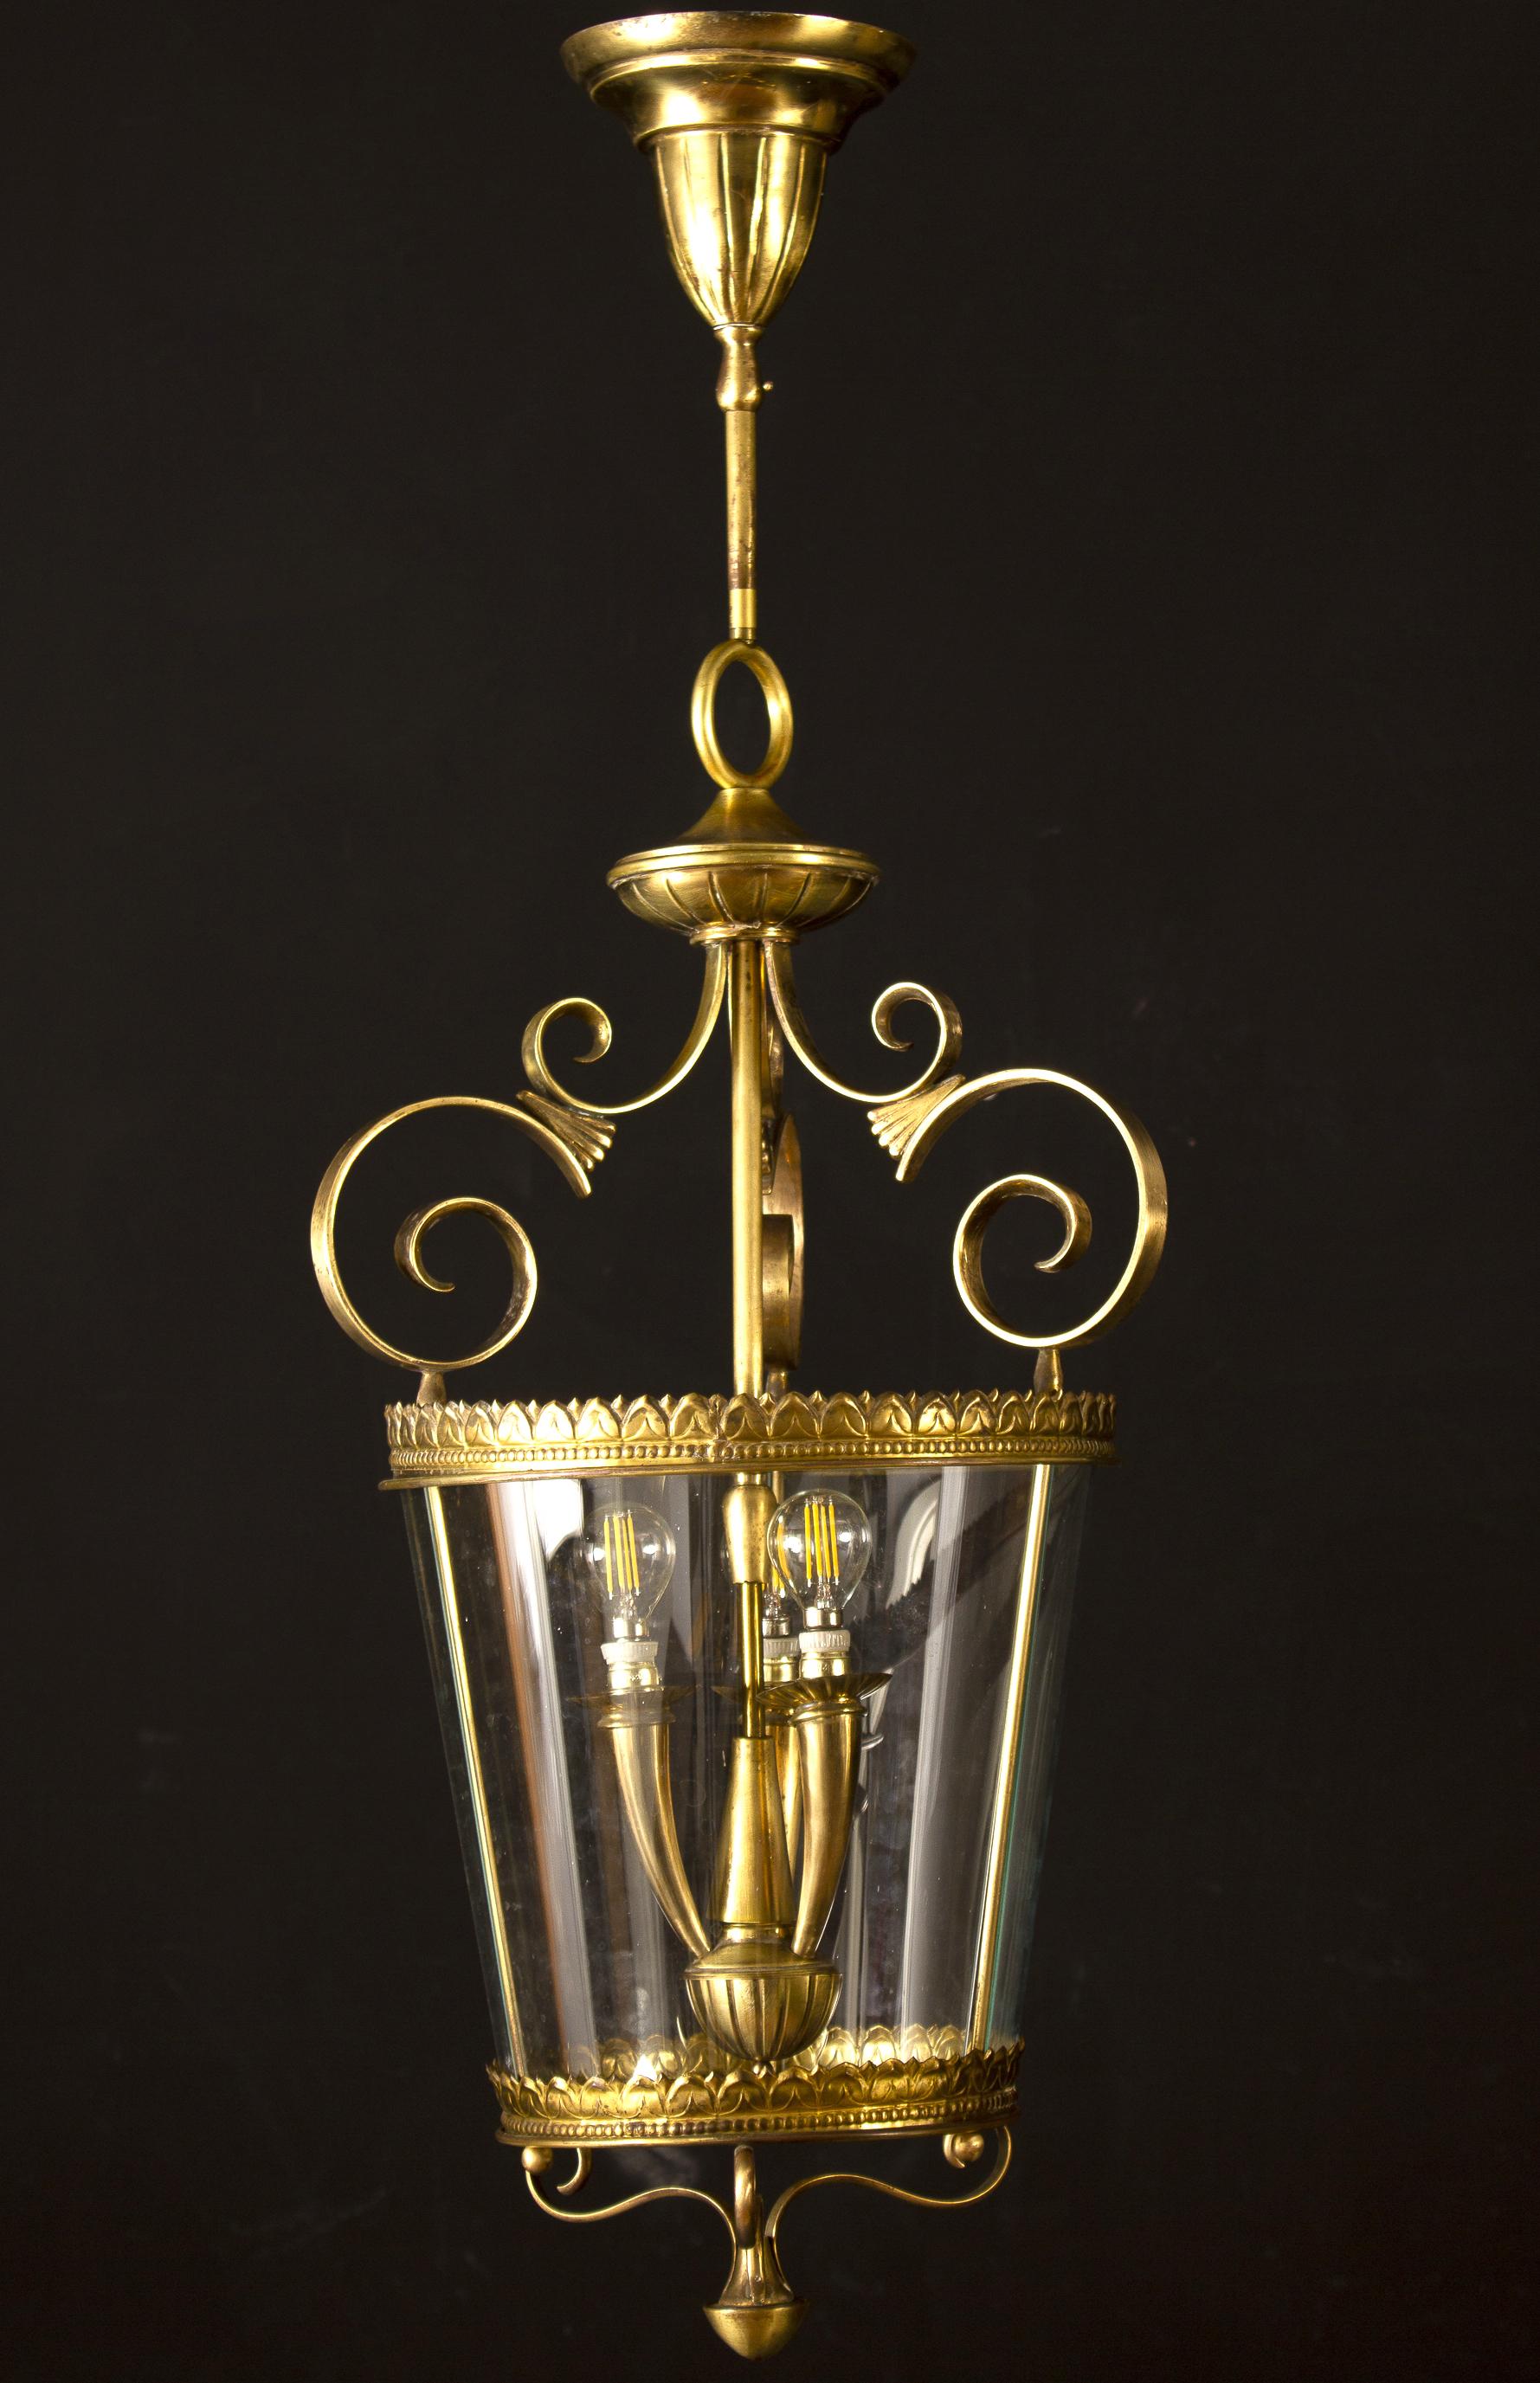 Amazing Italian Art Deco brass lantern or pendant.
Three E 14 light bulbs. We can wire for your country standards.